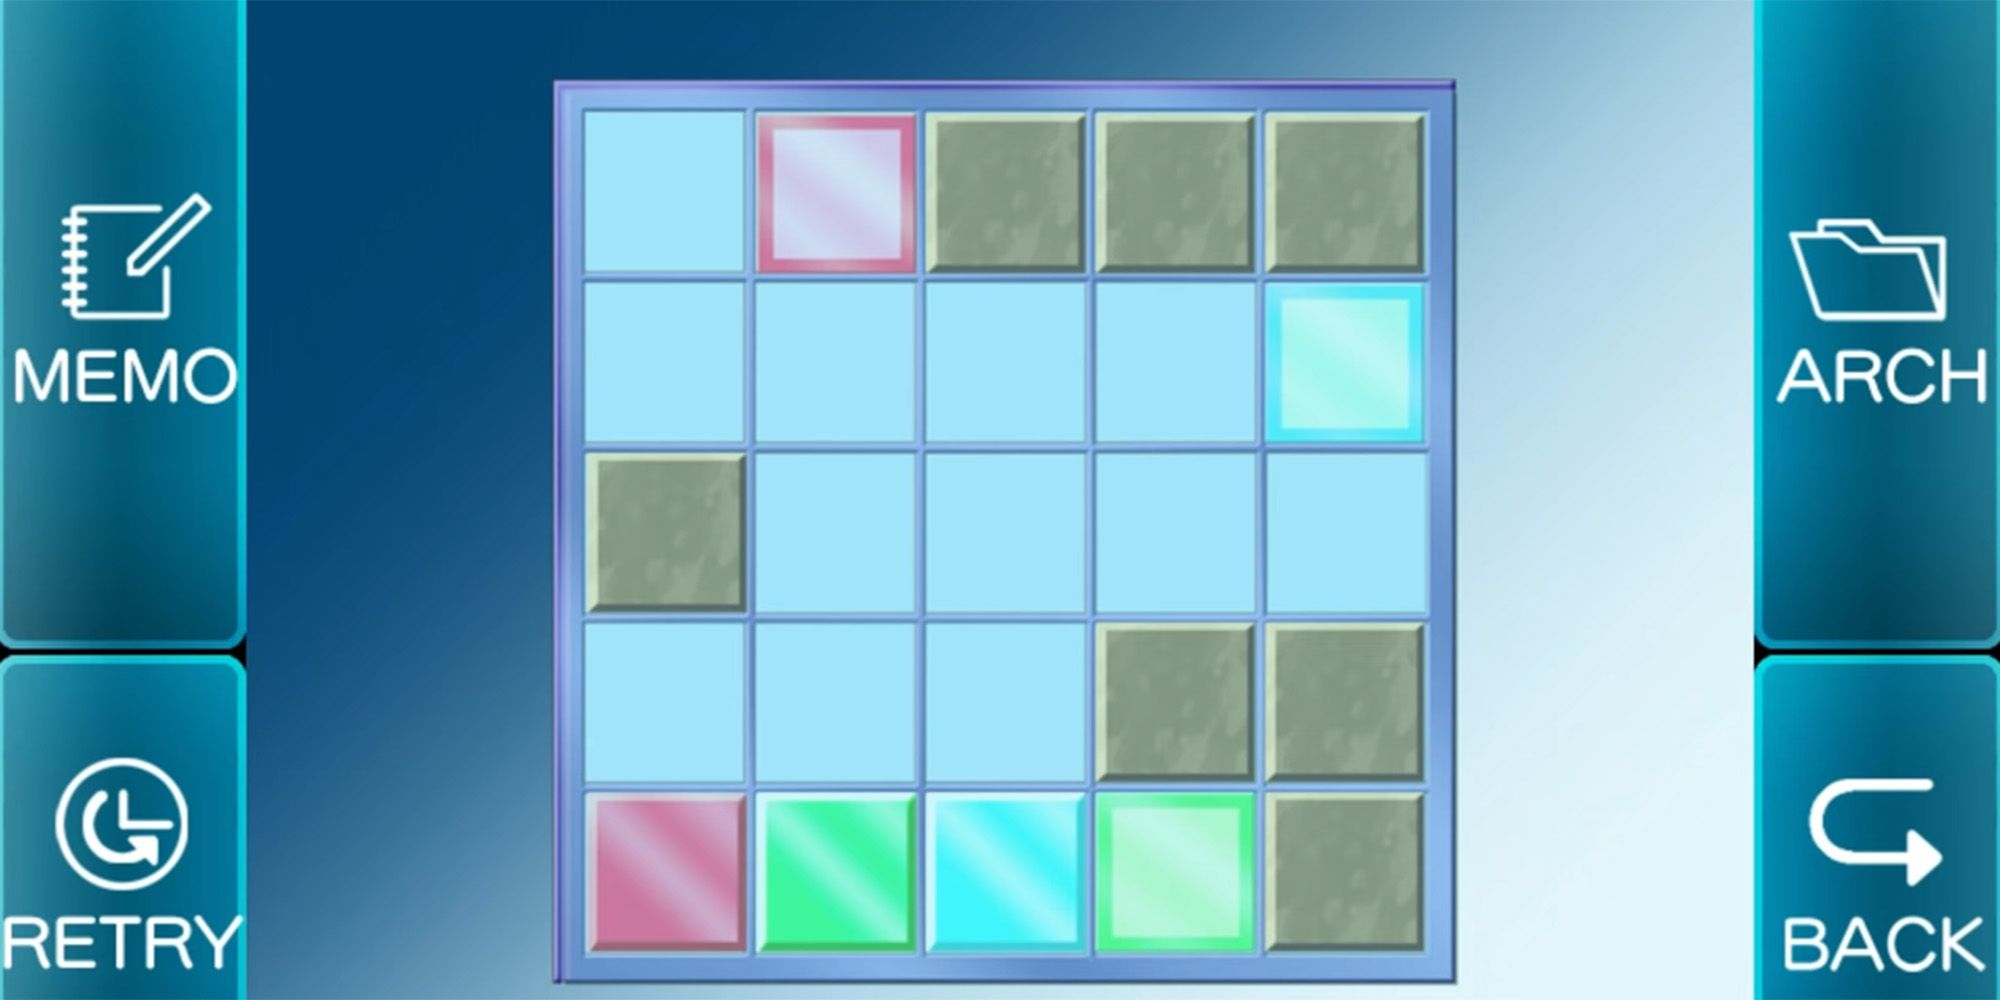 colored blocks on a grid that need to be moved into the correct spots